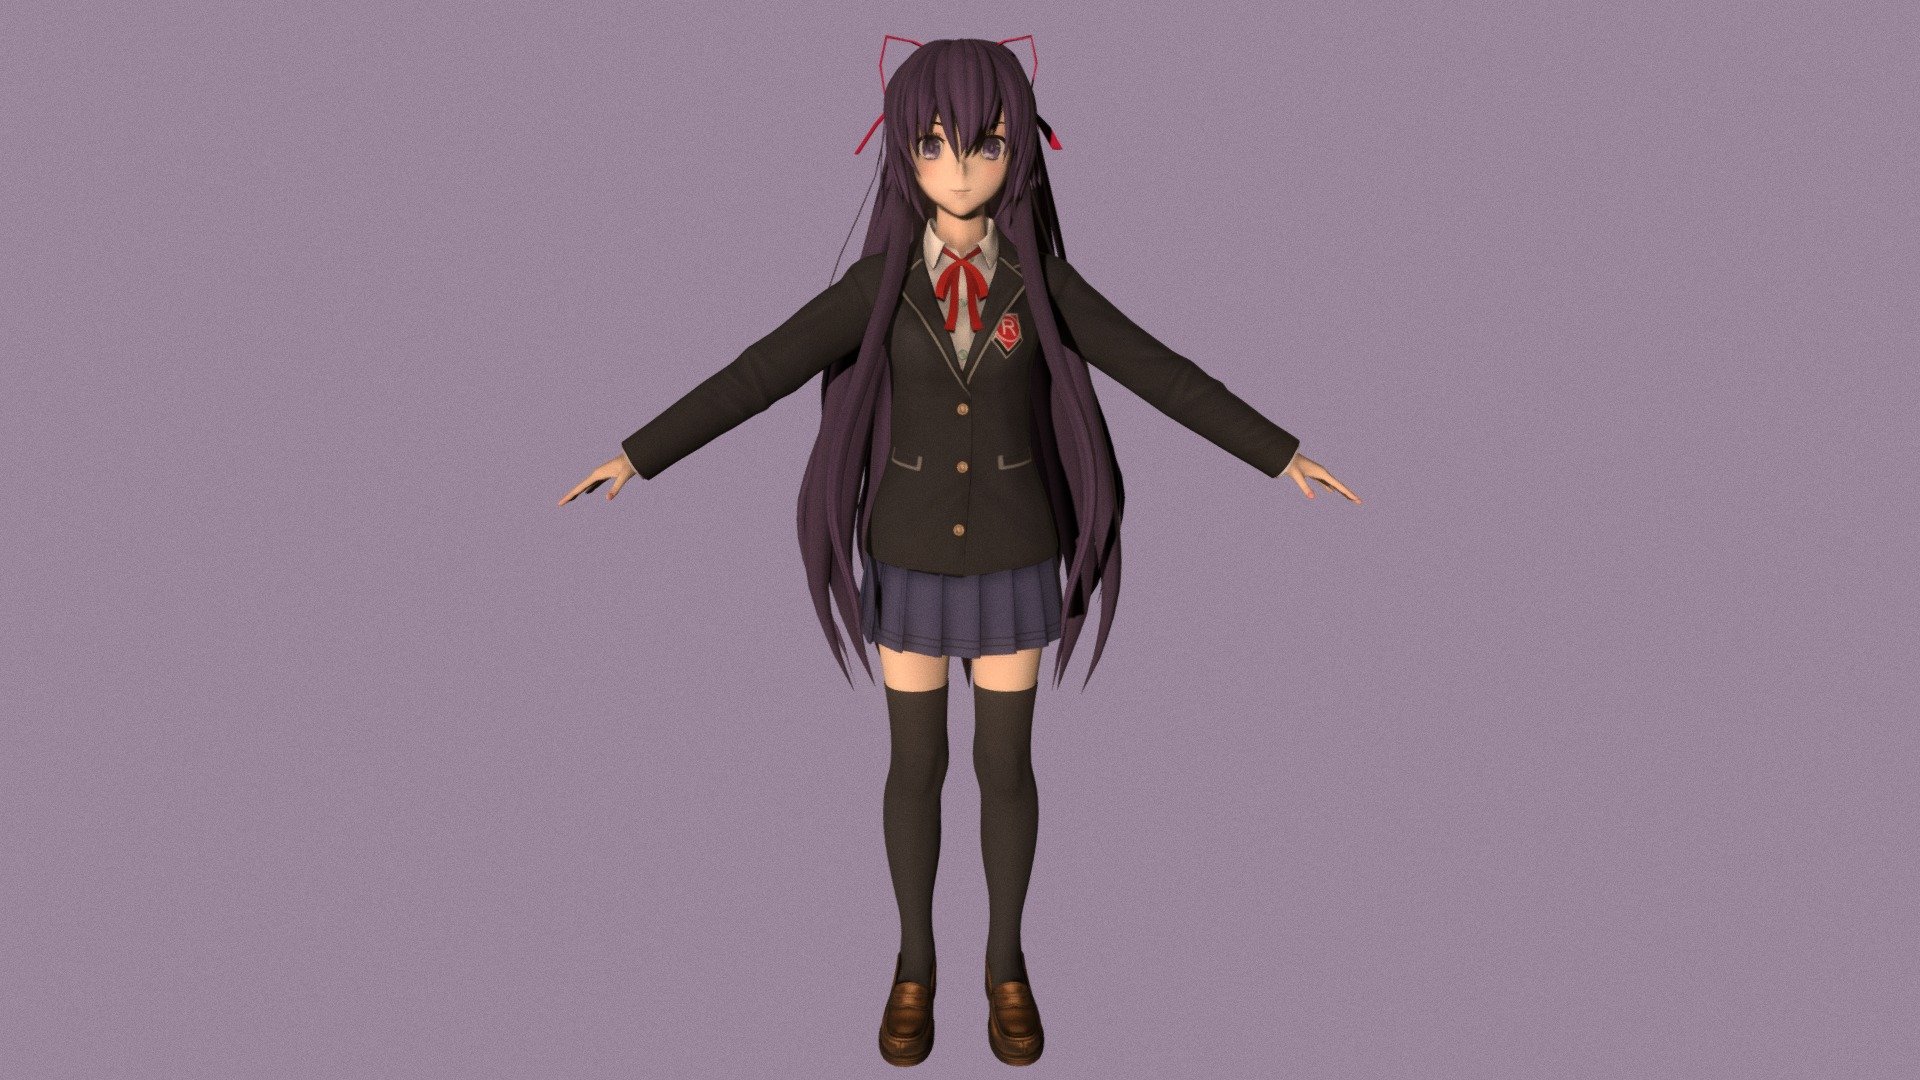 T-pose rigged model of anime girl Tohka Yatogami (Date A Live).

Body and clothings are rigged and skinned by 3ds Max CAT system.

Eye direction and facial animation controlled by Morpher modifier / Shape Keys / Blendshape.

This product include .FBX (ver. 7200) and .MAX (ver. 2010) files.

3ds Max version is turbosmoothed to give a high quality render (as you can see here).

Original main body mesh have ~7.000 polys.

This 3D model may need some tweaking to adapt the rig system to games engine and other platforms.

I support convert model to various file formats (the rig data will be lost in this process): 3DS; AI; ASE; DAE; DWF; DWG; DXF; FLT; HTR; IGS; M3G; MQO; OBJ; SAT; STL; W3D; WRL; X.

You can buy all of my models in one pack to save cost: https://sketchfab.com/3d-models/all-of-my-anime-girls-c5a56156994e4193b9e8fa21a3b8360b

And I can make commission models.

If you have any questions, please leave a comment or contact me via my email 3d.eden.project@gmail.com 3d model